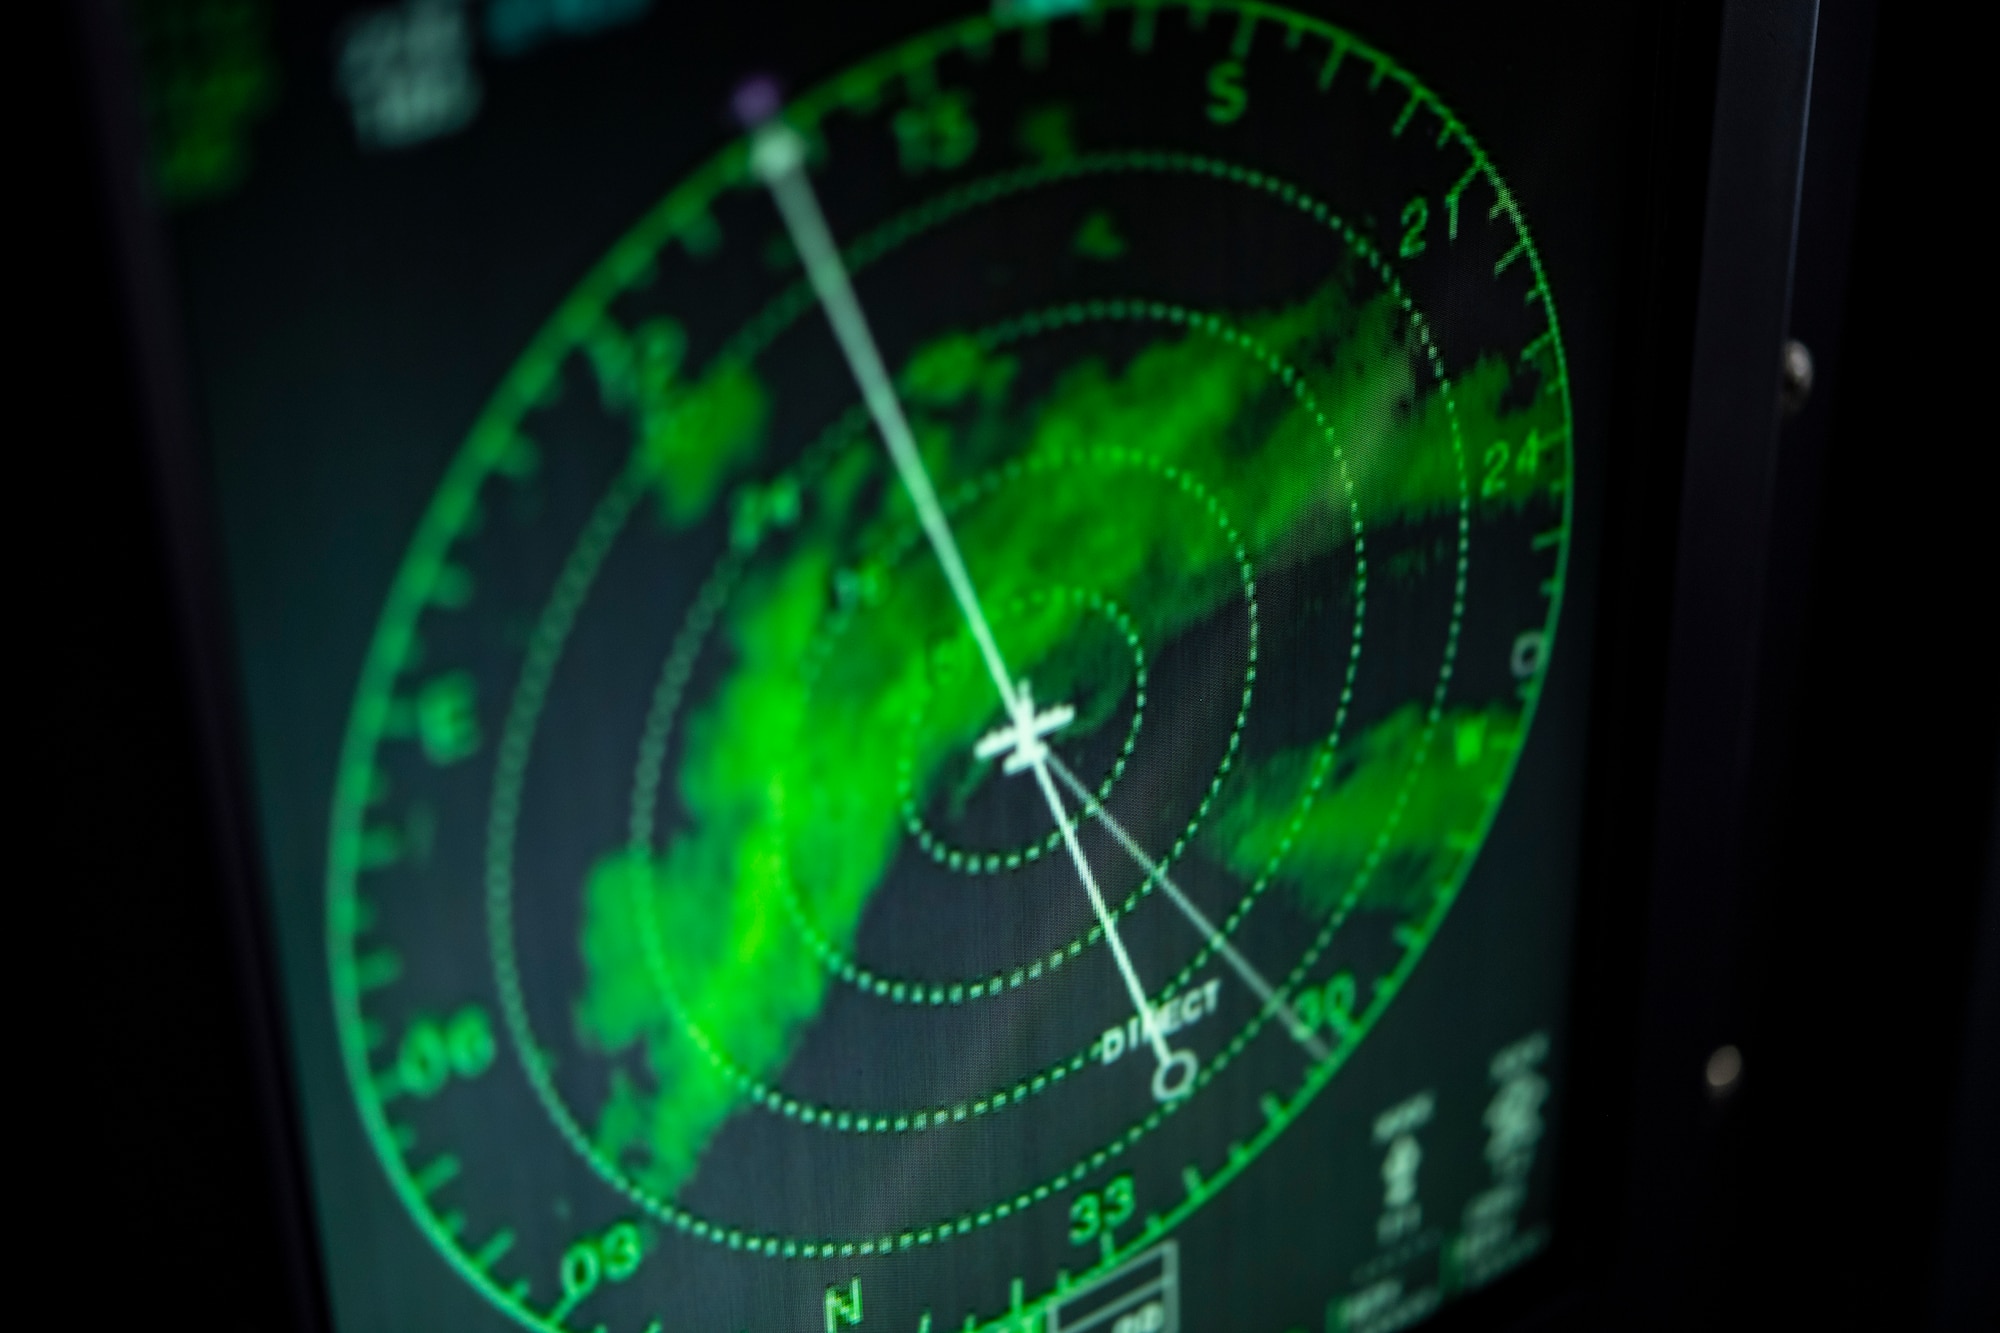 The doppler radar on board a WC-130J Hercules during a U.S. Air Force Reserve 53rd Weather Reconnaissance Squadron mission Sept. 12, 2018. Also known as the Hurricane Hunters, the squadron is conducting a storm tasking mission into Hurricane Florence to provide critical and timely weather data for the National Hurricane Center to assist in providing up-to-date and accurate information for storm forecasts. (U.S. Air Force photo by Tech. Sgt. Chris Hibben)